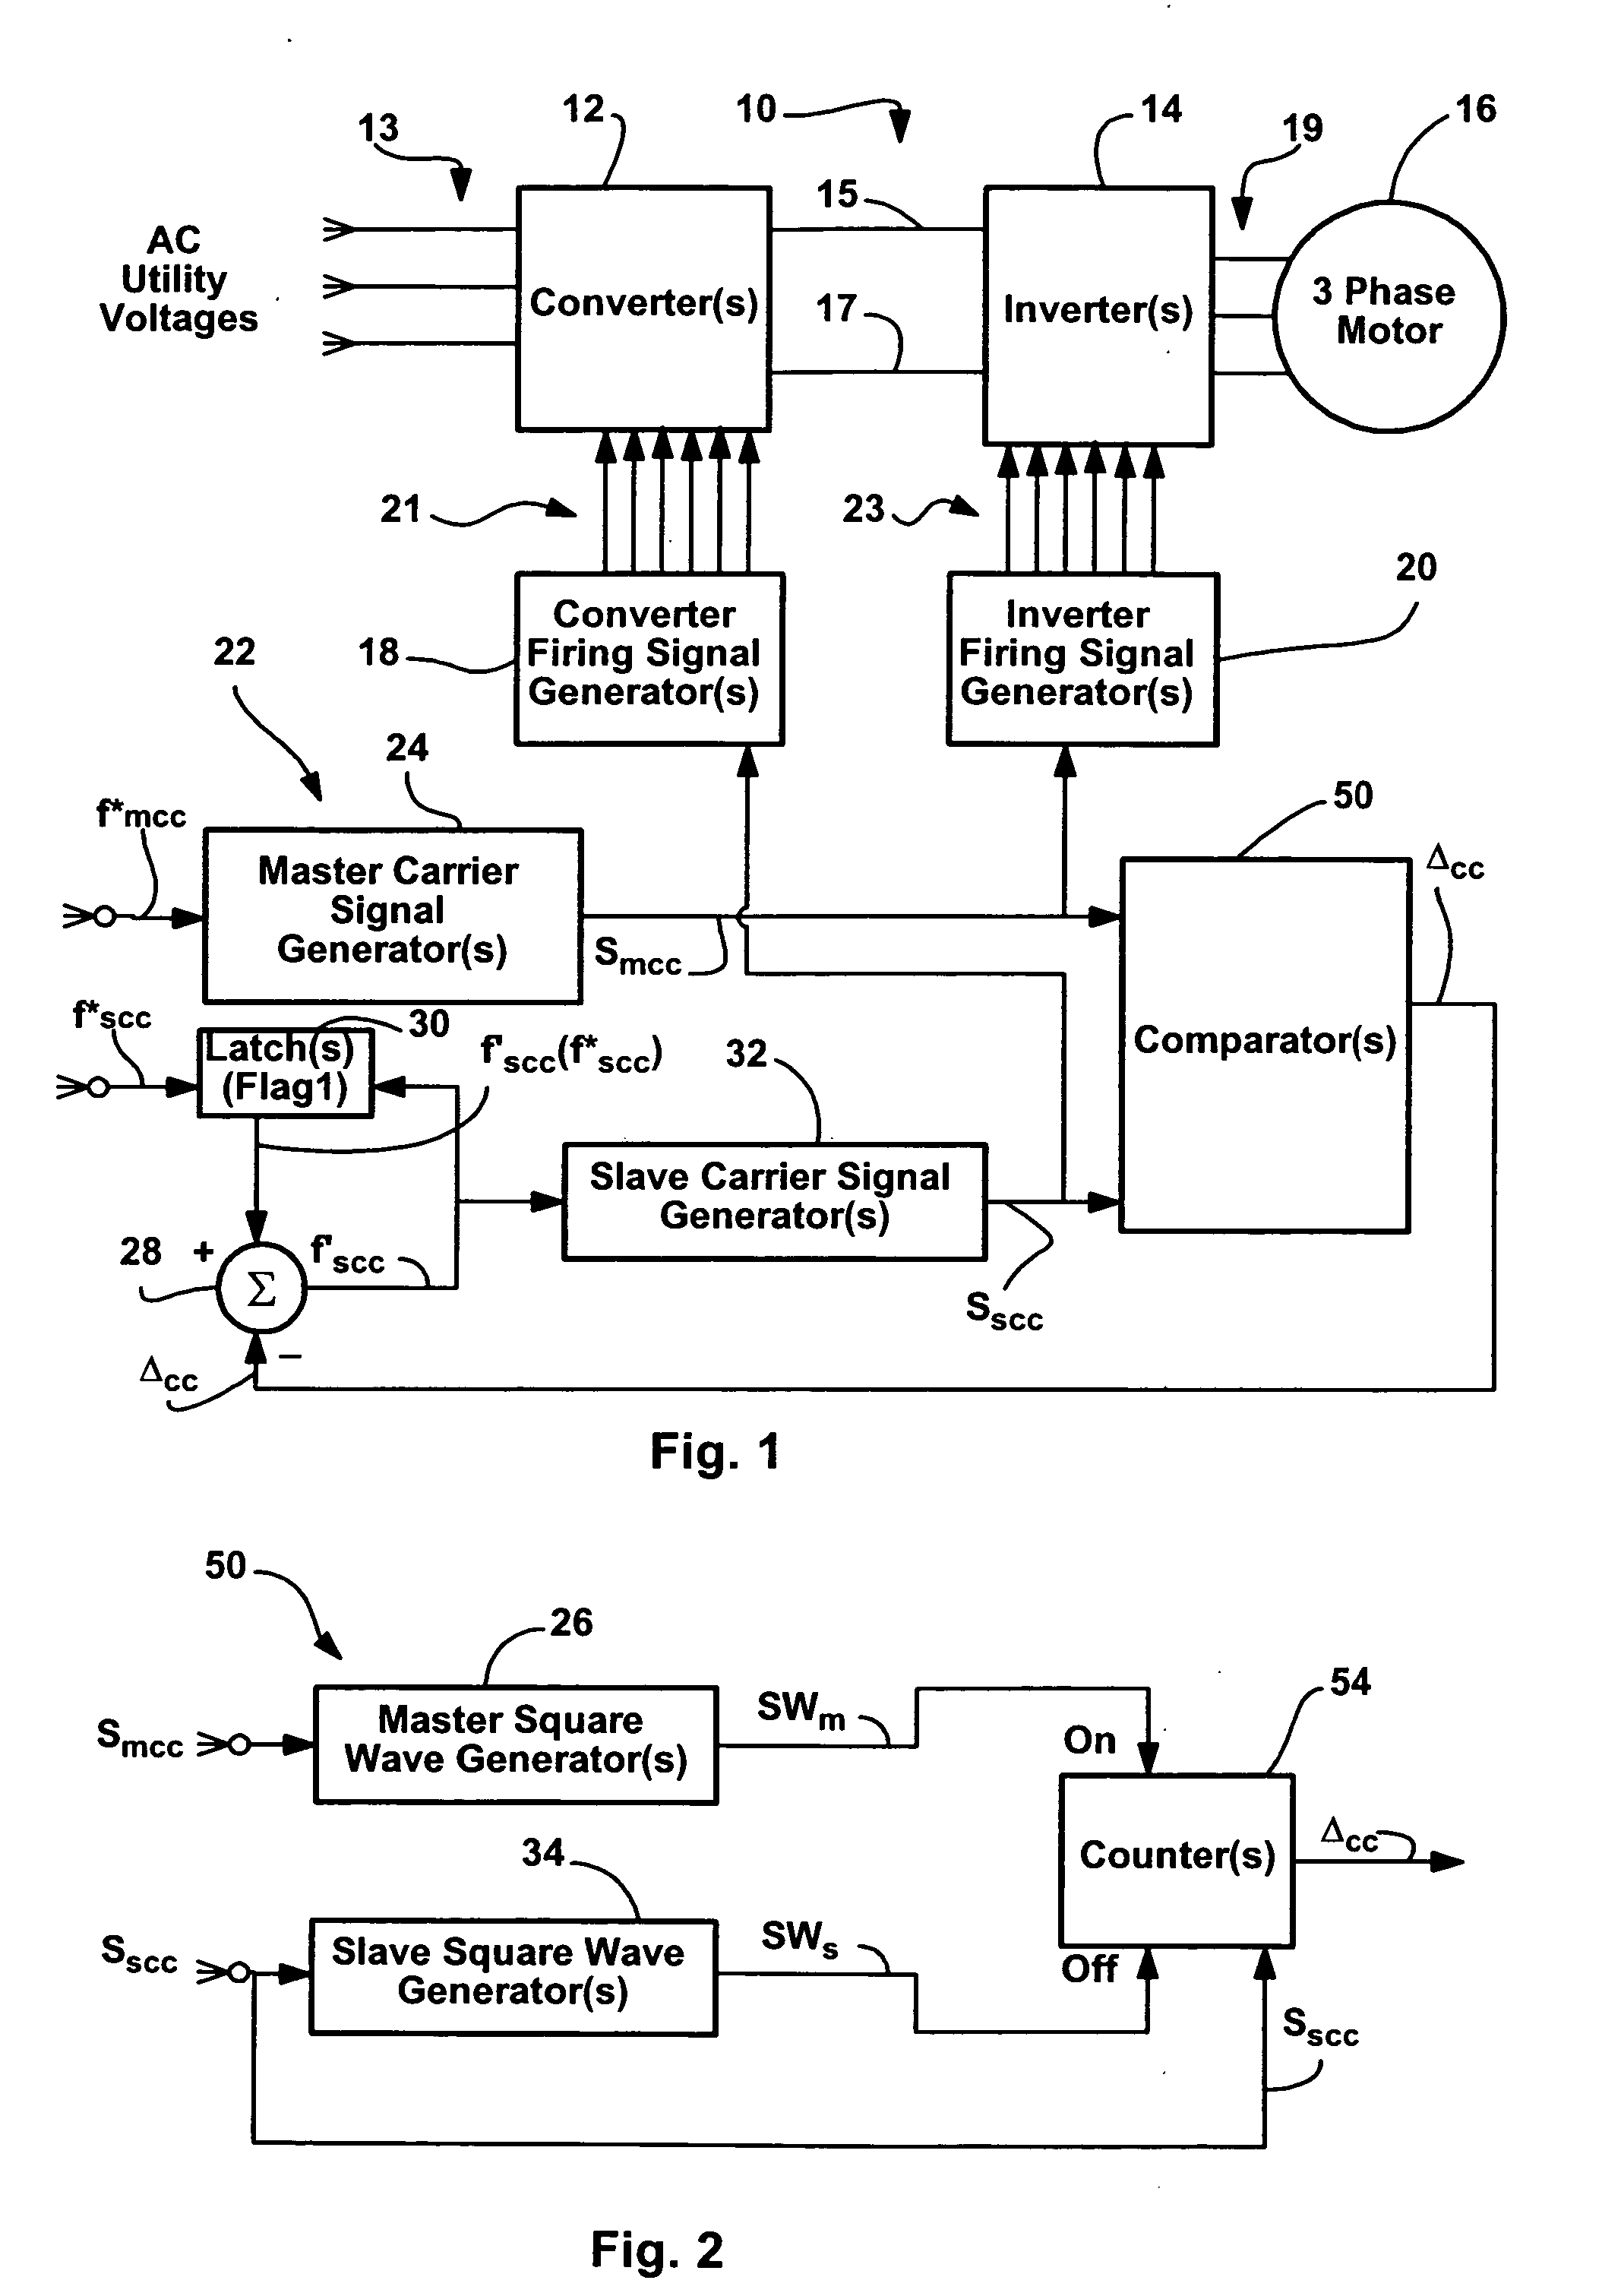 Carrier synchronization to reduce common mode voltage in an AC drive